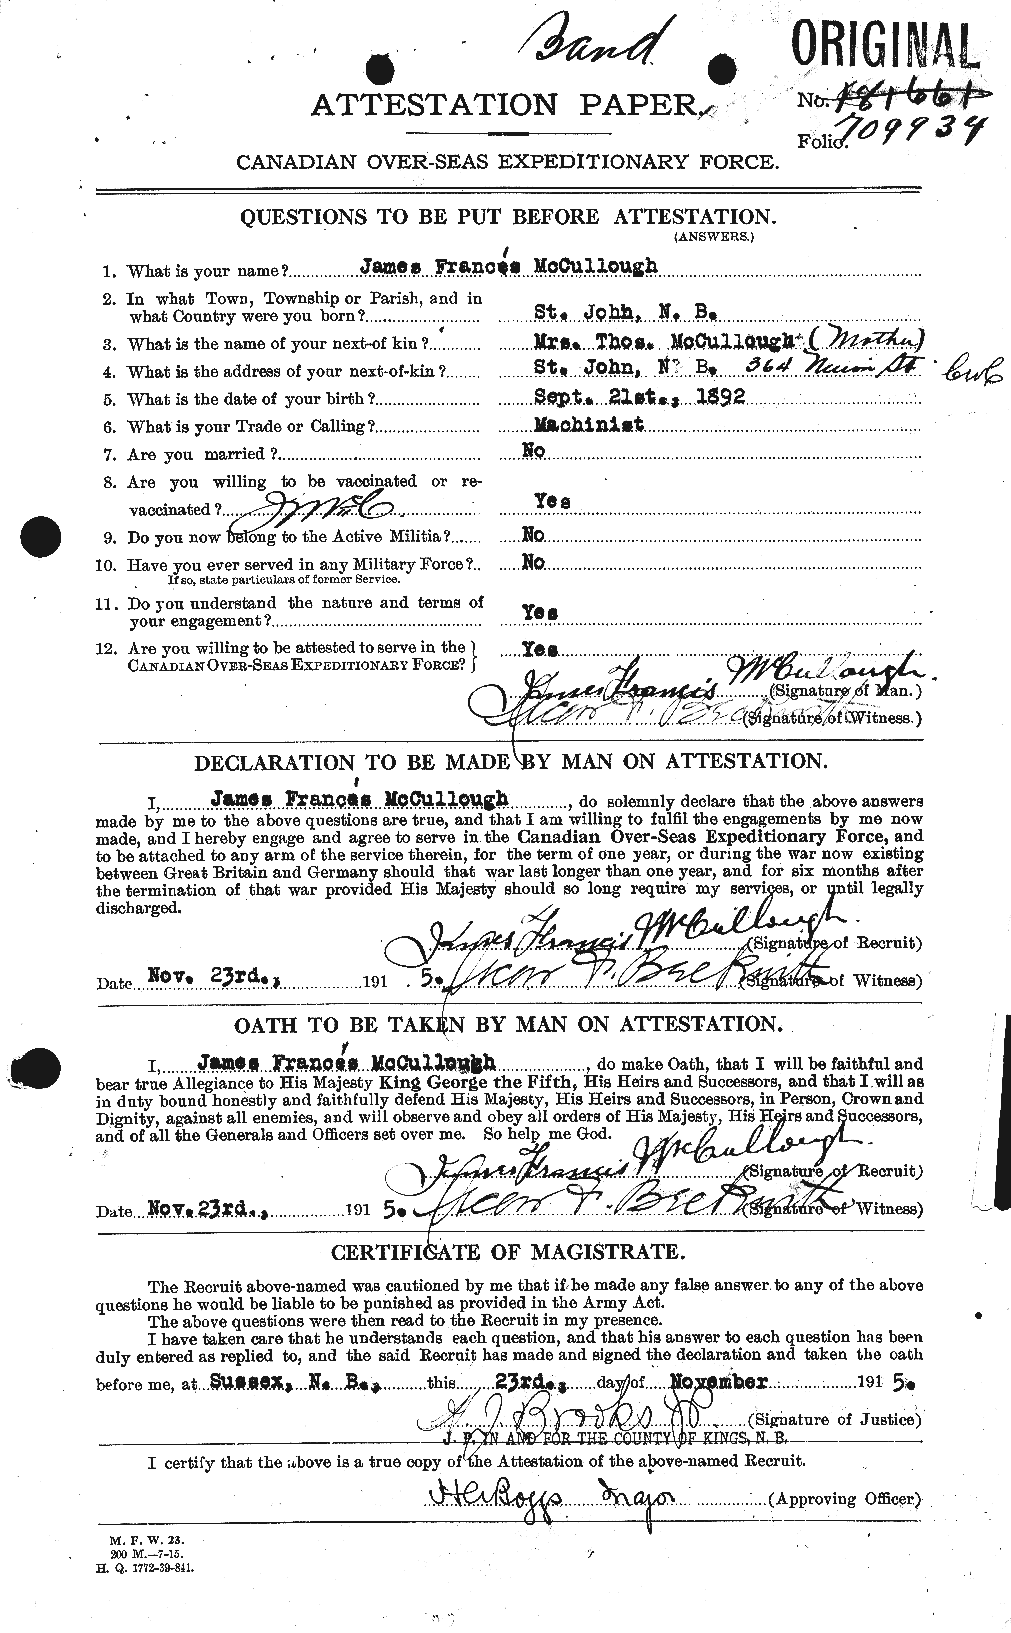 Personnel Records of the First World War - CEF 136921a